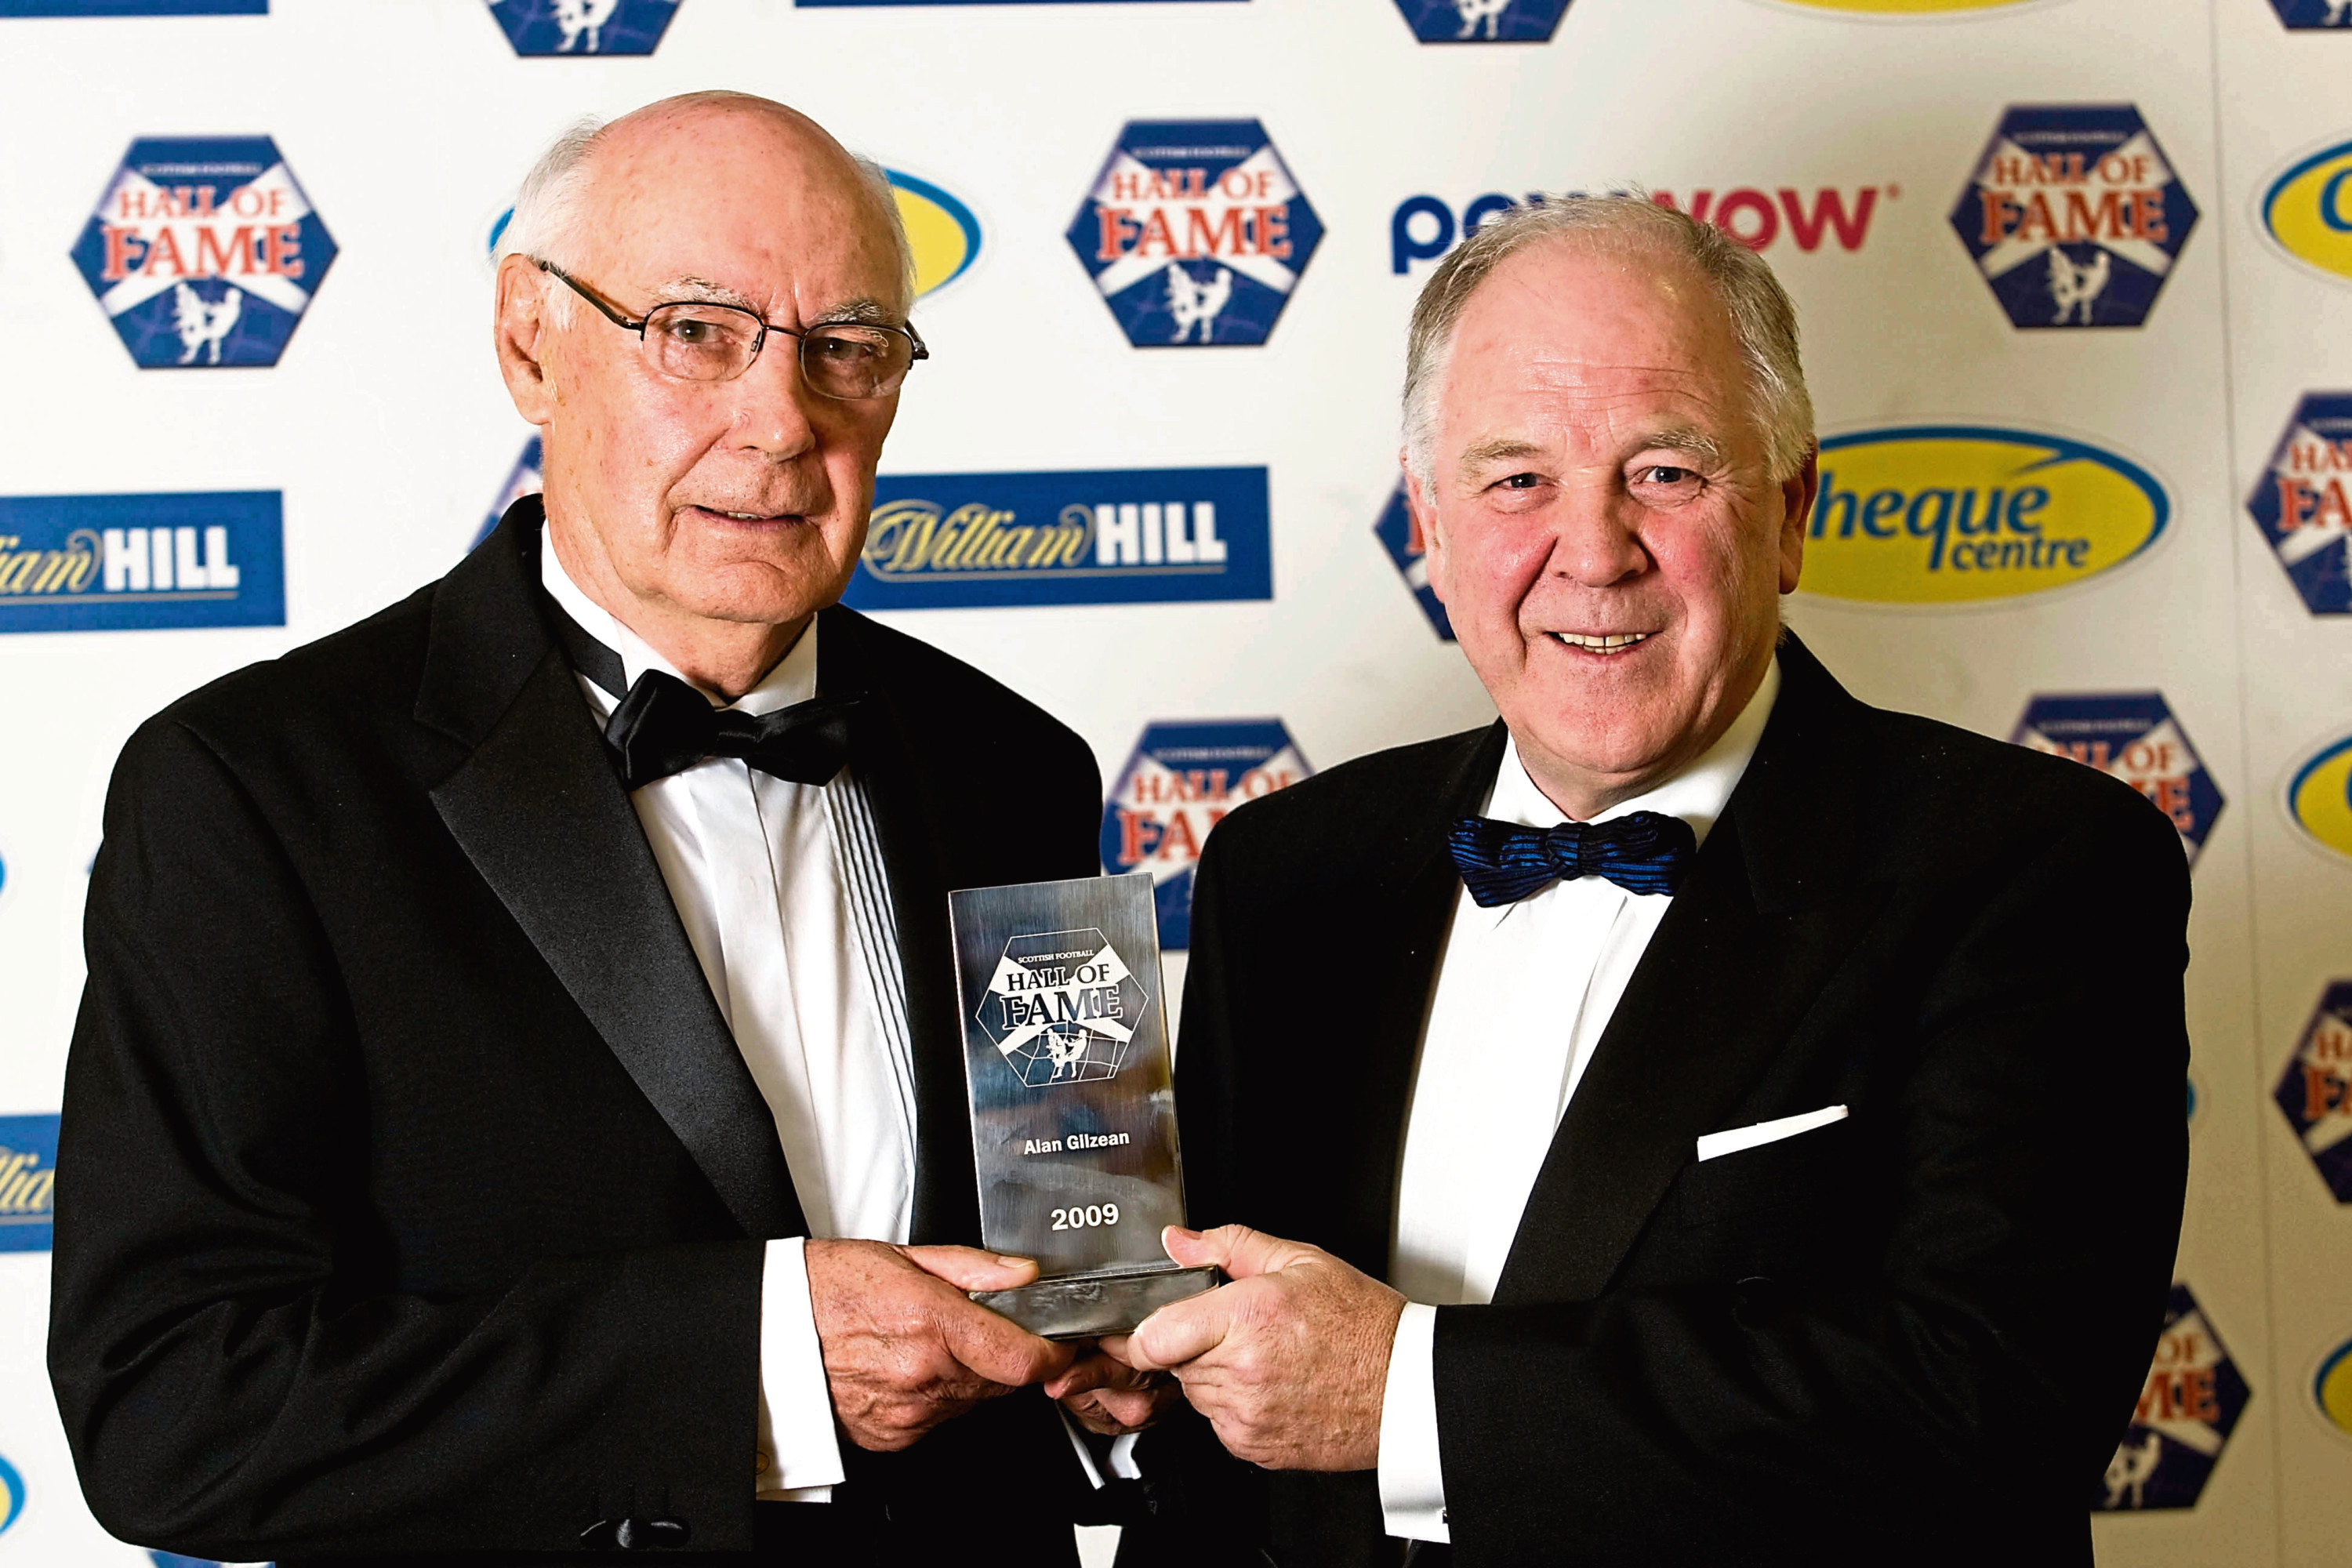 Ex-Scotland boss and 1962 league winner Craig Brown inducted former teammate and Dens Park legend Alan Gilzean into the Scottish Football Hall of Fame in 2009.